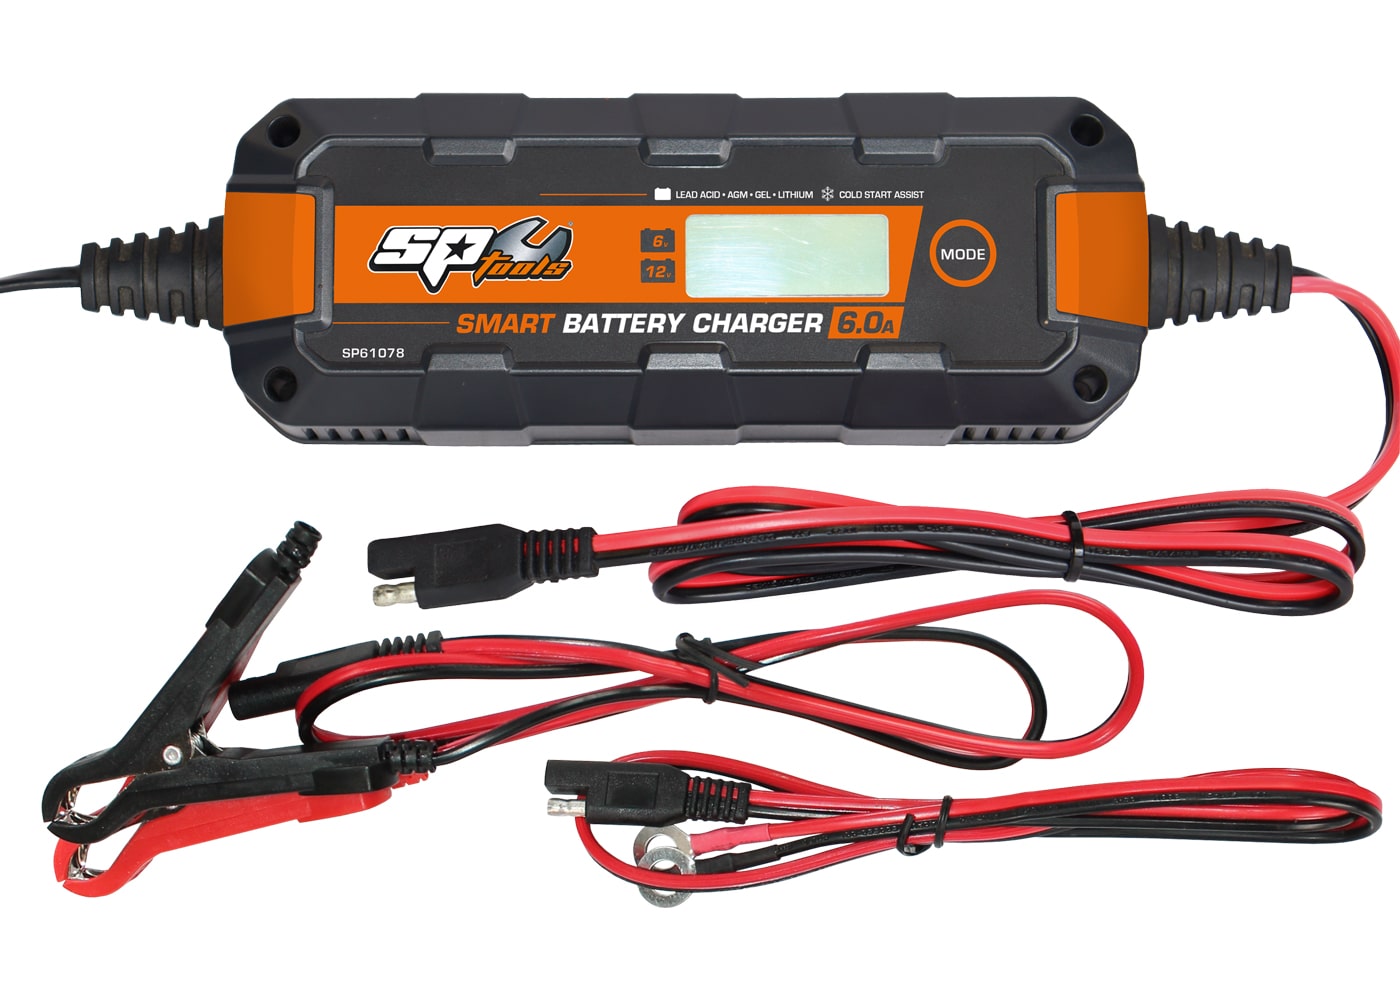 Smart Battery Charger 8 Stage Multi Volt 6 & 12V 6A - SP61078 by SP Tools